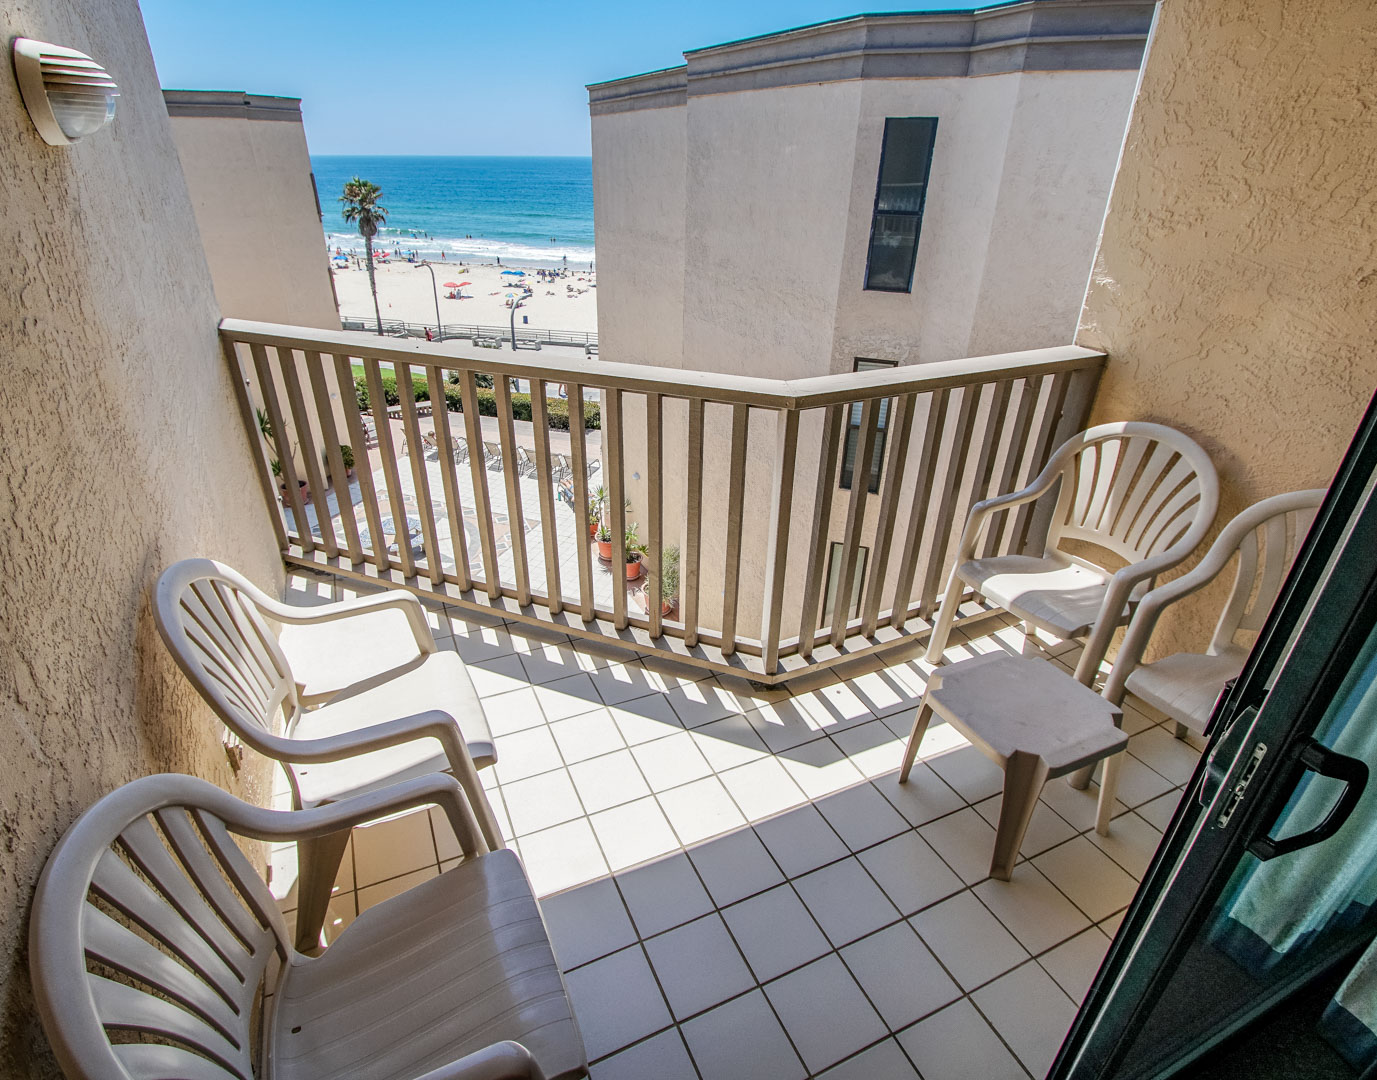 A balcony view to the beach at VRI's See the Sea in San Diego, CA.